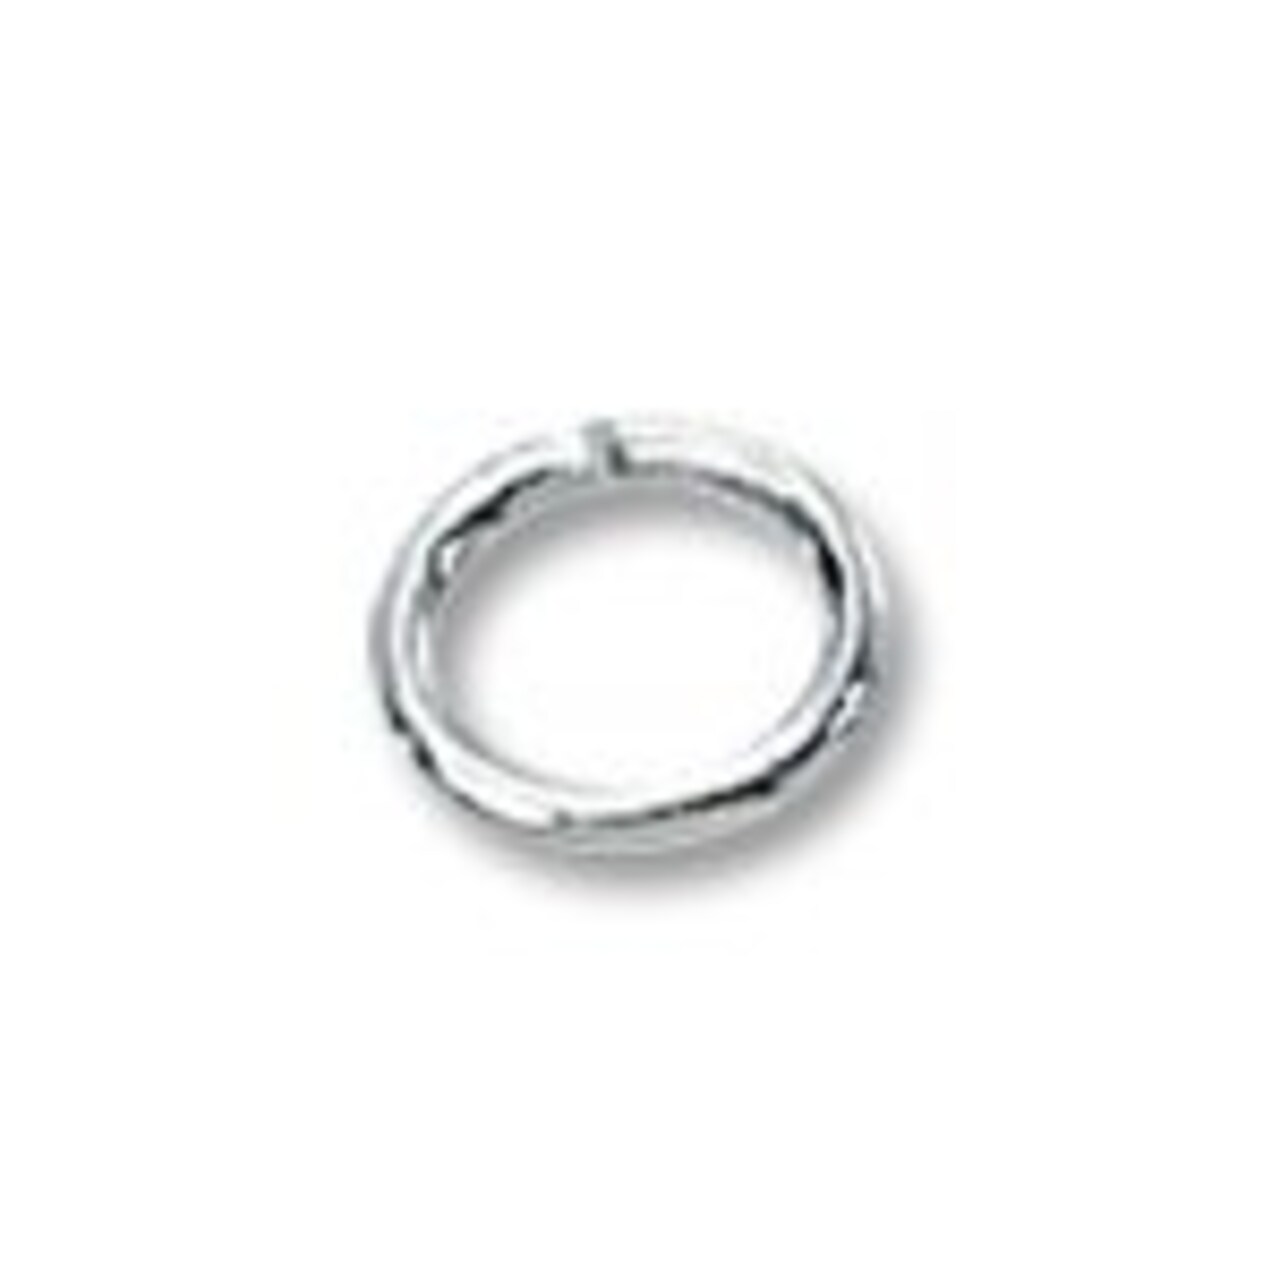 JewelrySupply Jump Ring Oval Open 5x4mm Sterling Silver (4-Pcs)